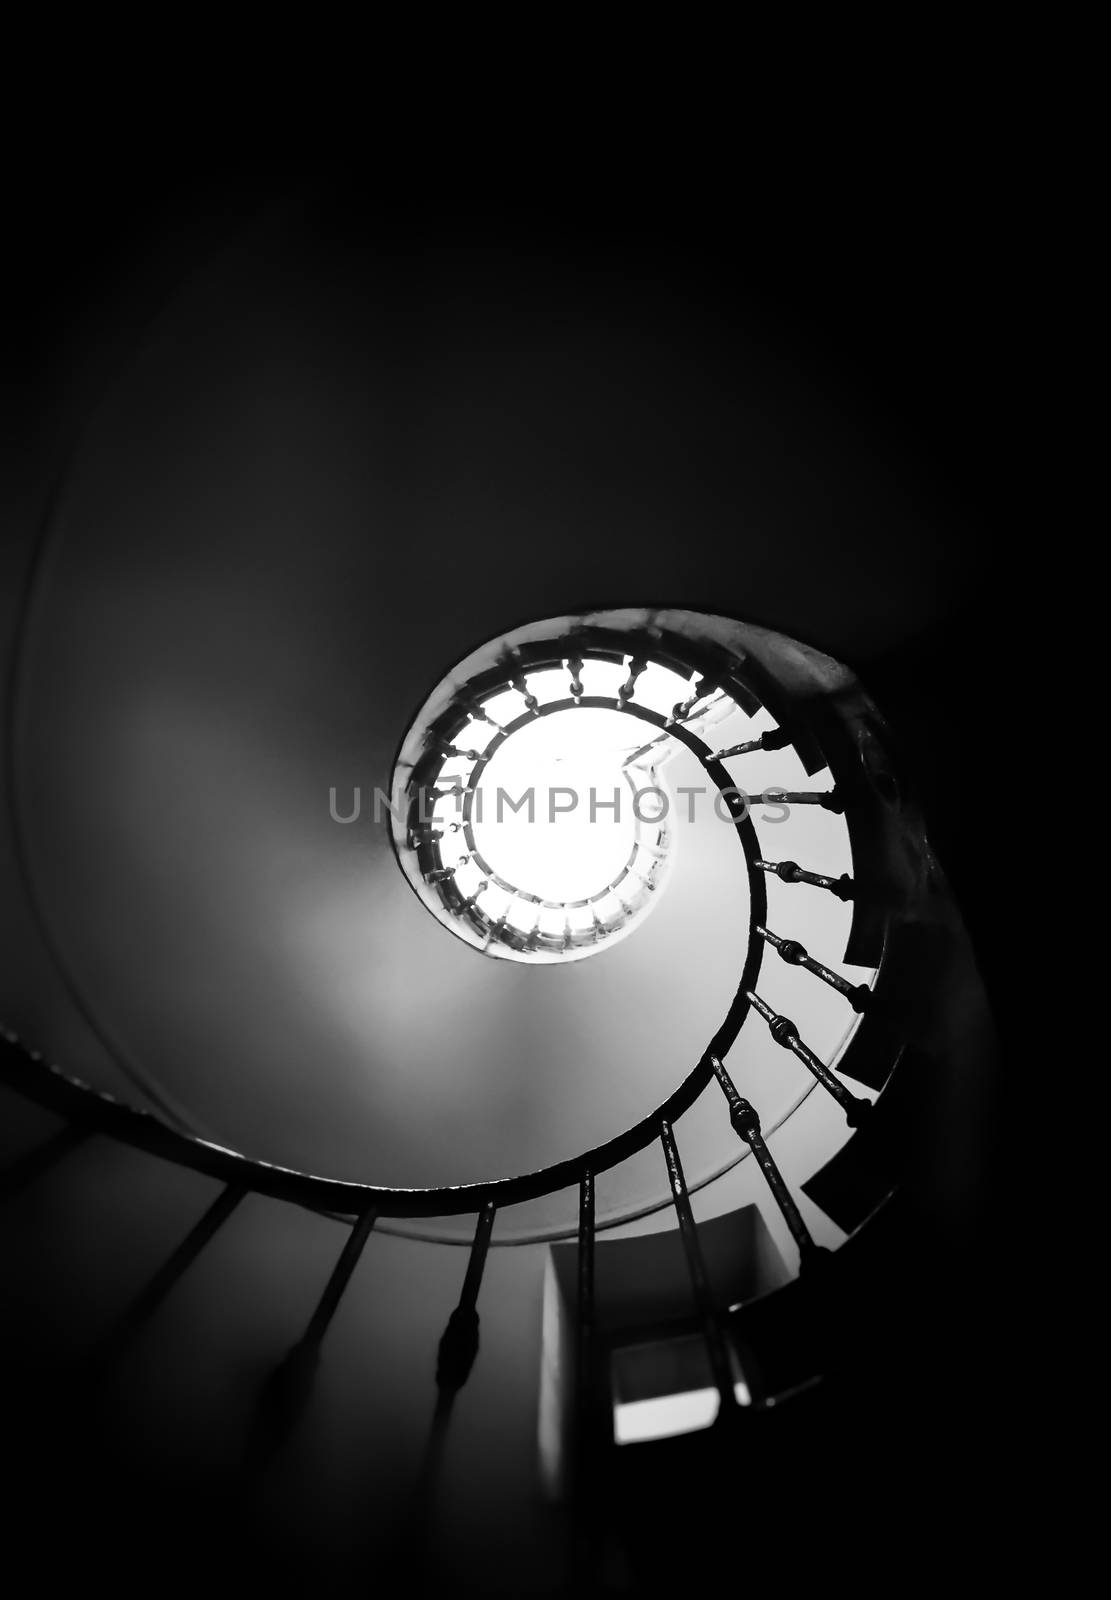 Ancient spiral staircase seen from below. Black and white shot